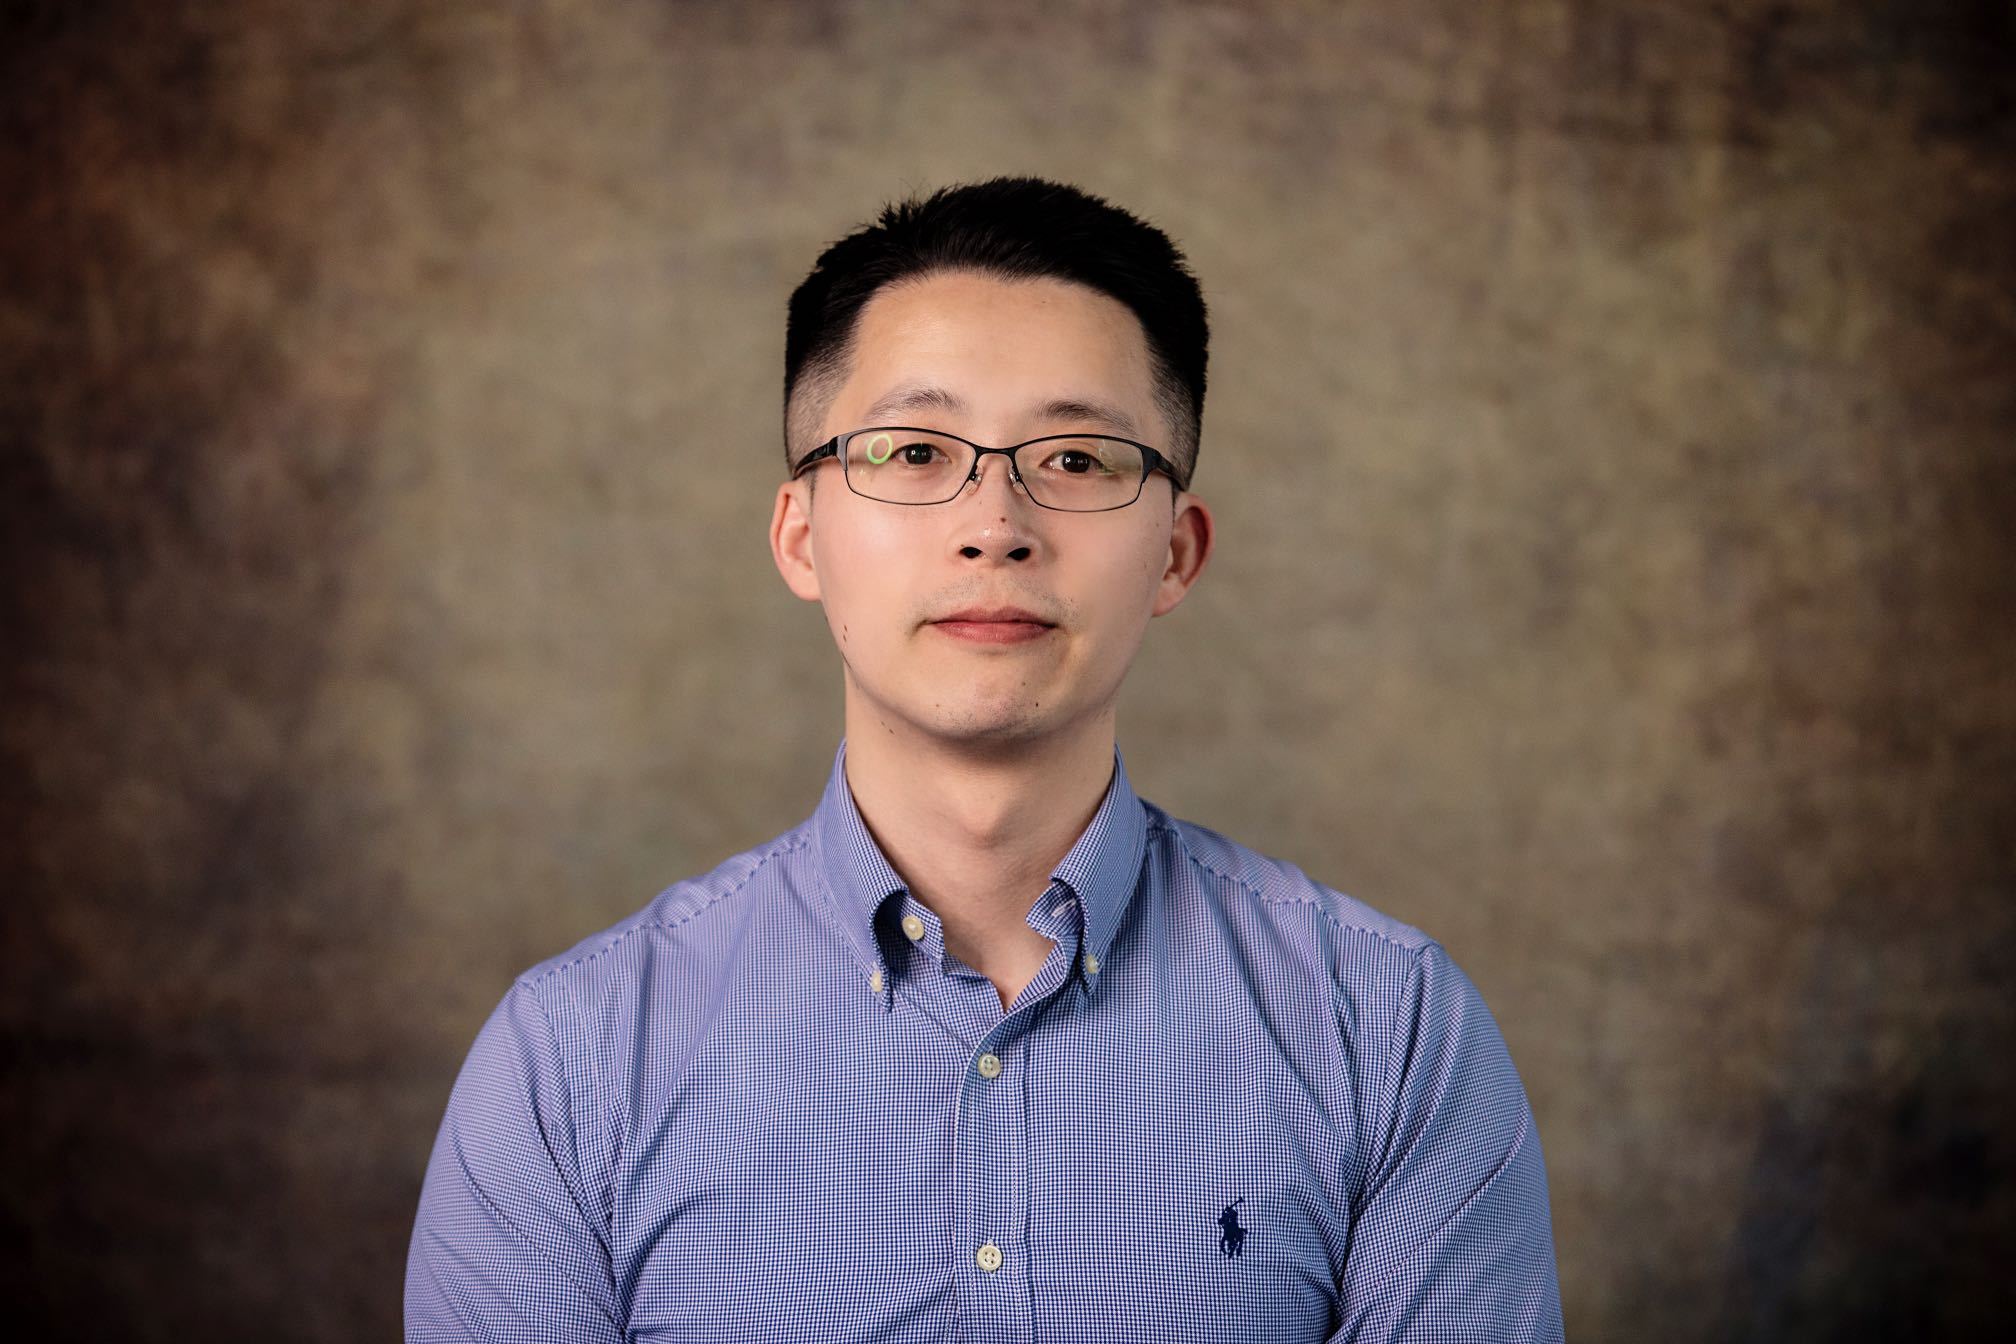 NEWS – Dr. Anthony Zhang (Lecturer in Second Language Learning, University of Reading) wins the 2022-2023 University of Reading Research Fellowship